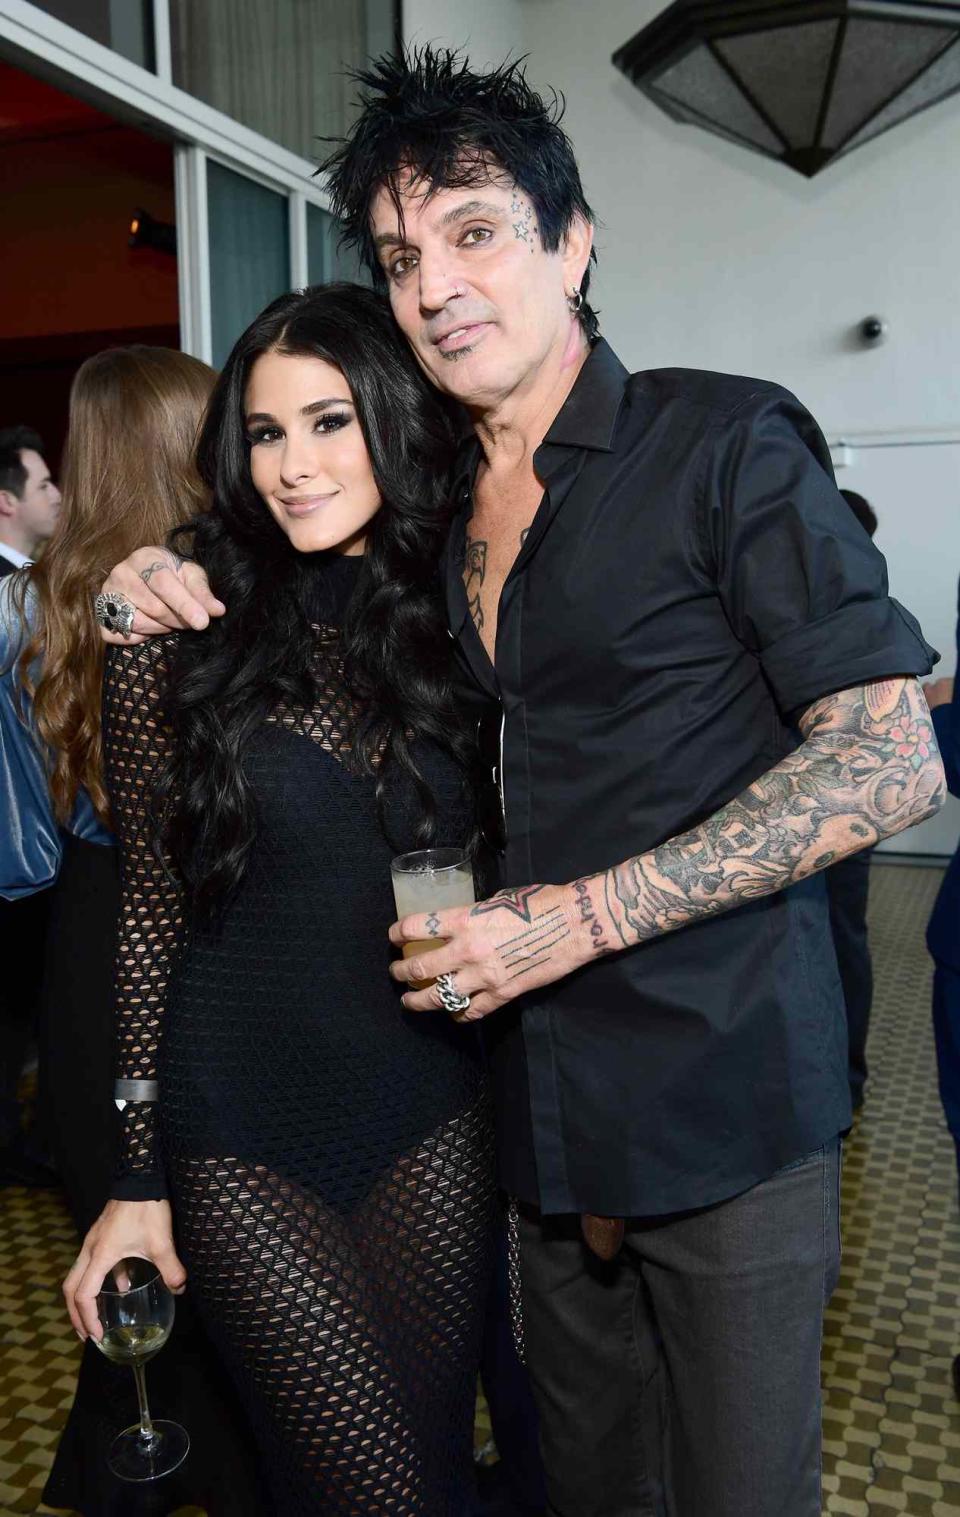 Brittany Furlan and Tommy Lee at the 2017 Streamy Awards at The Beverly Hilton Hotel on September 26, 2017 in Beverly Hills, California